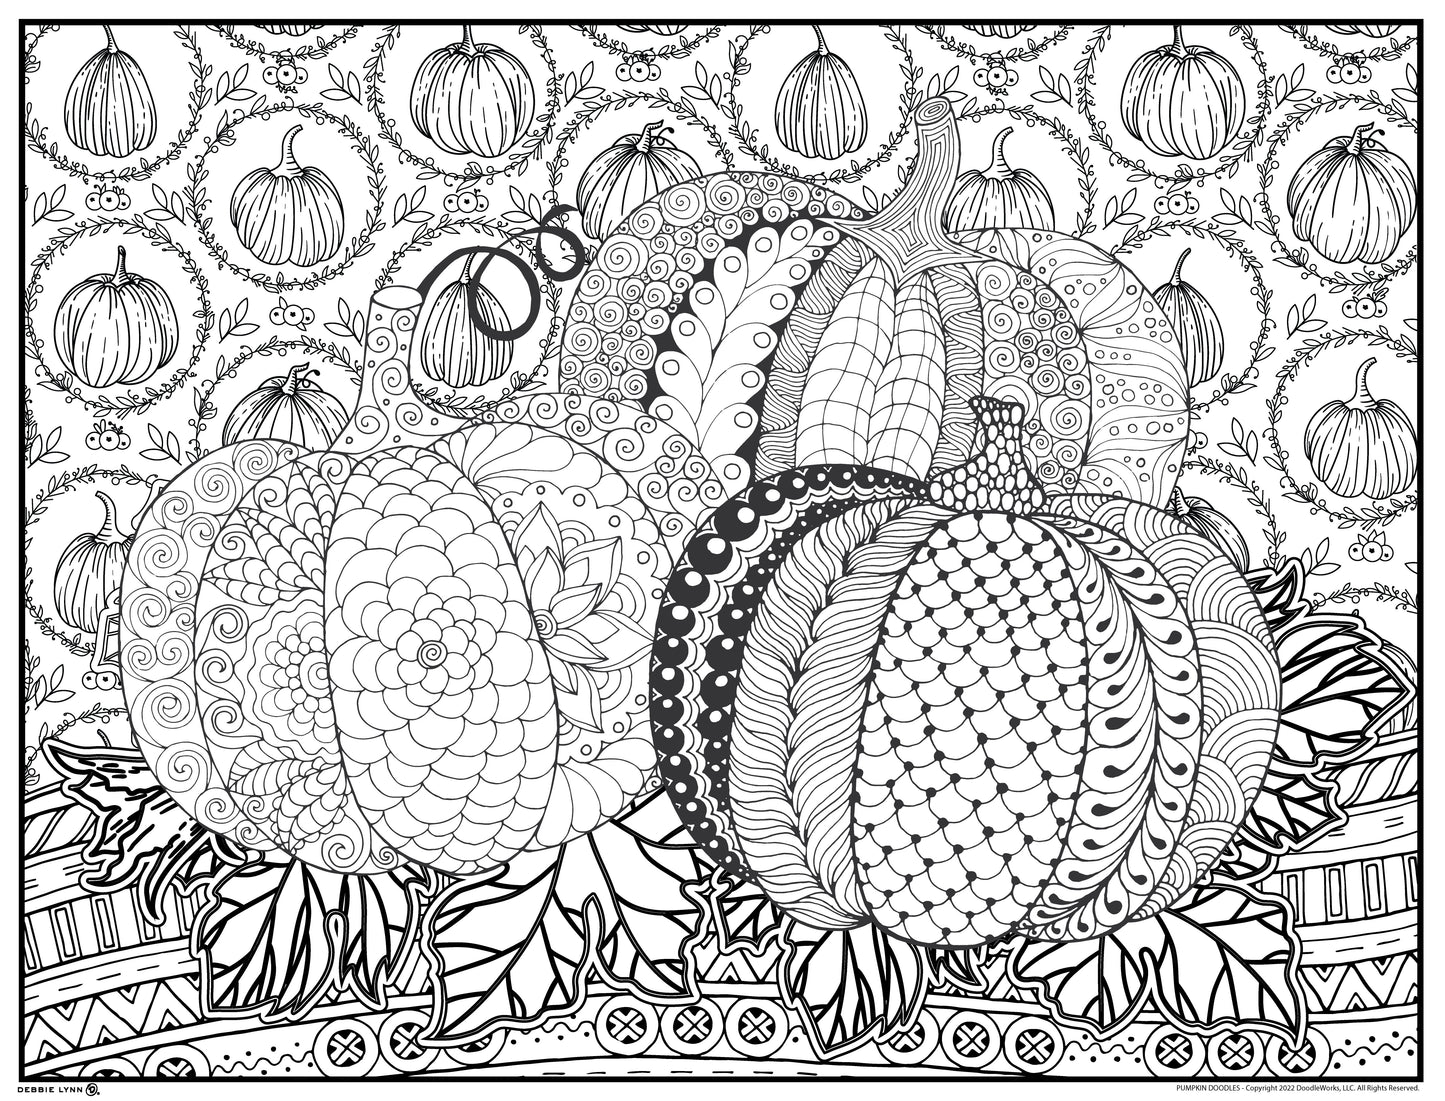 Pumpkin Doodles Personalized Giant Coloring Poster 46"x60"